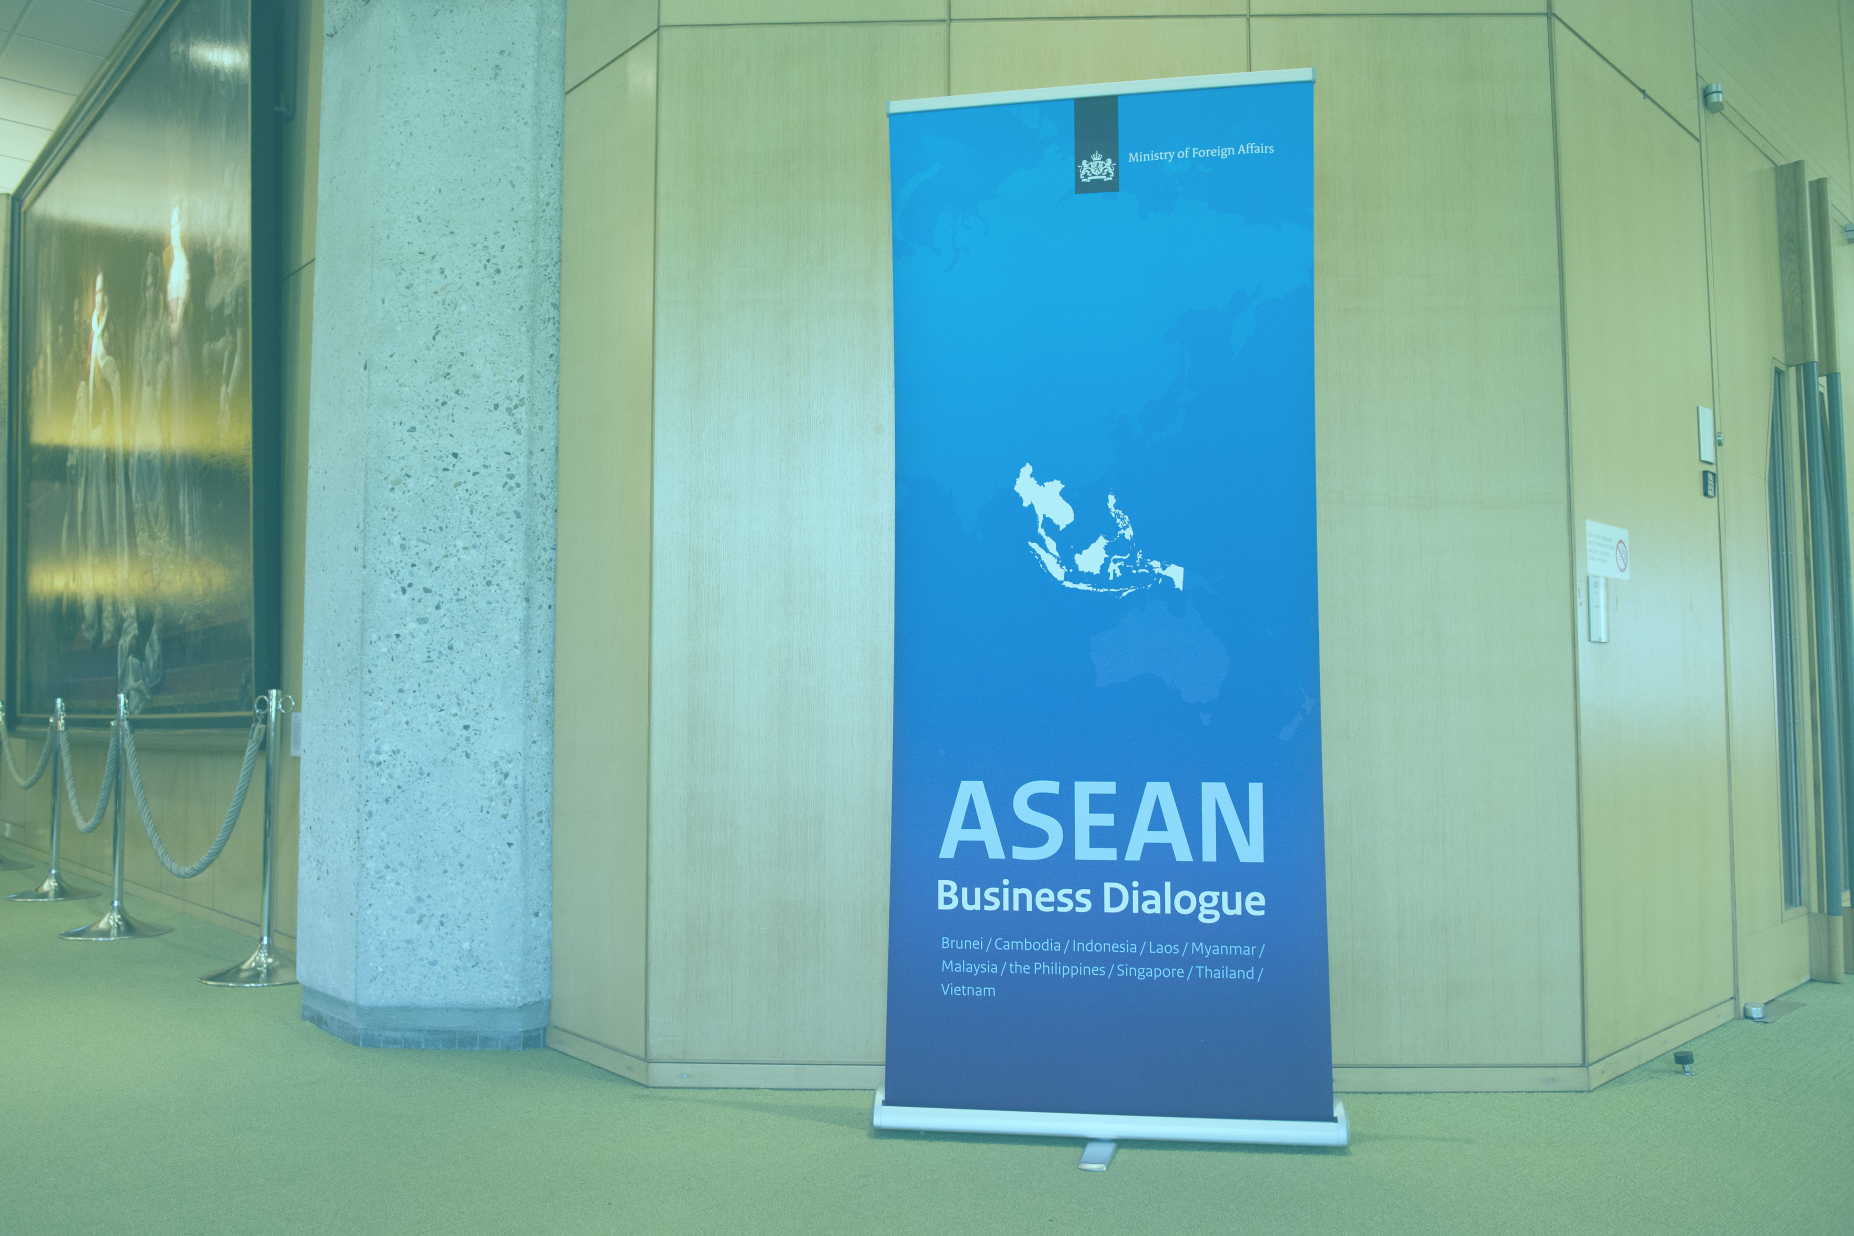 Photo: "170511 ASEAN Business Dialogue 3234", by Ministerie van Buitenlandse Zaken, licensed under CC BY-SA 2.0. Hue modified from the original